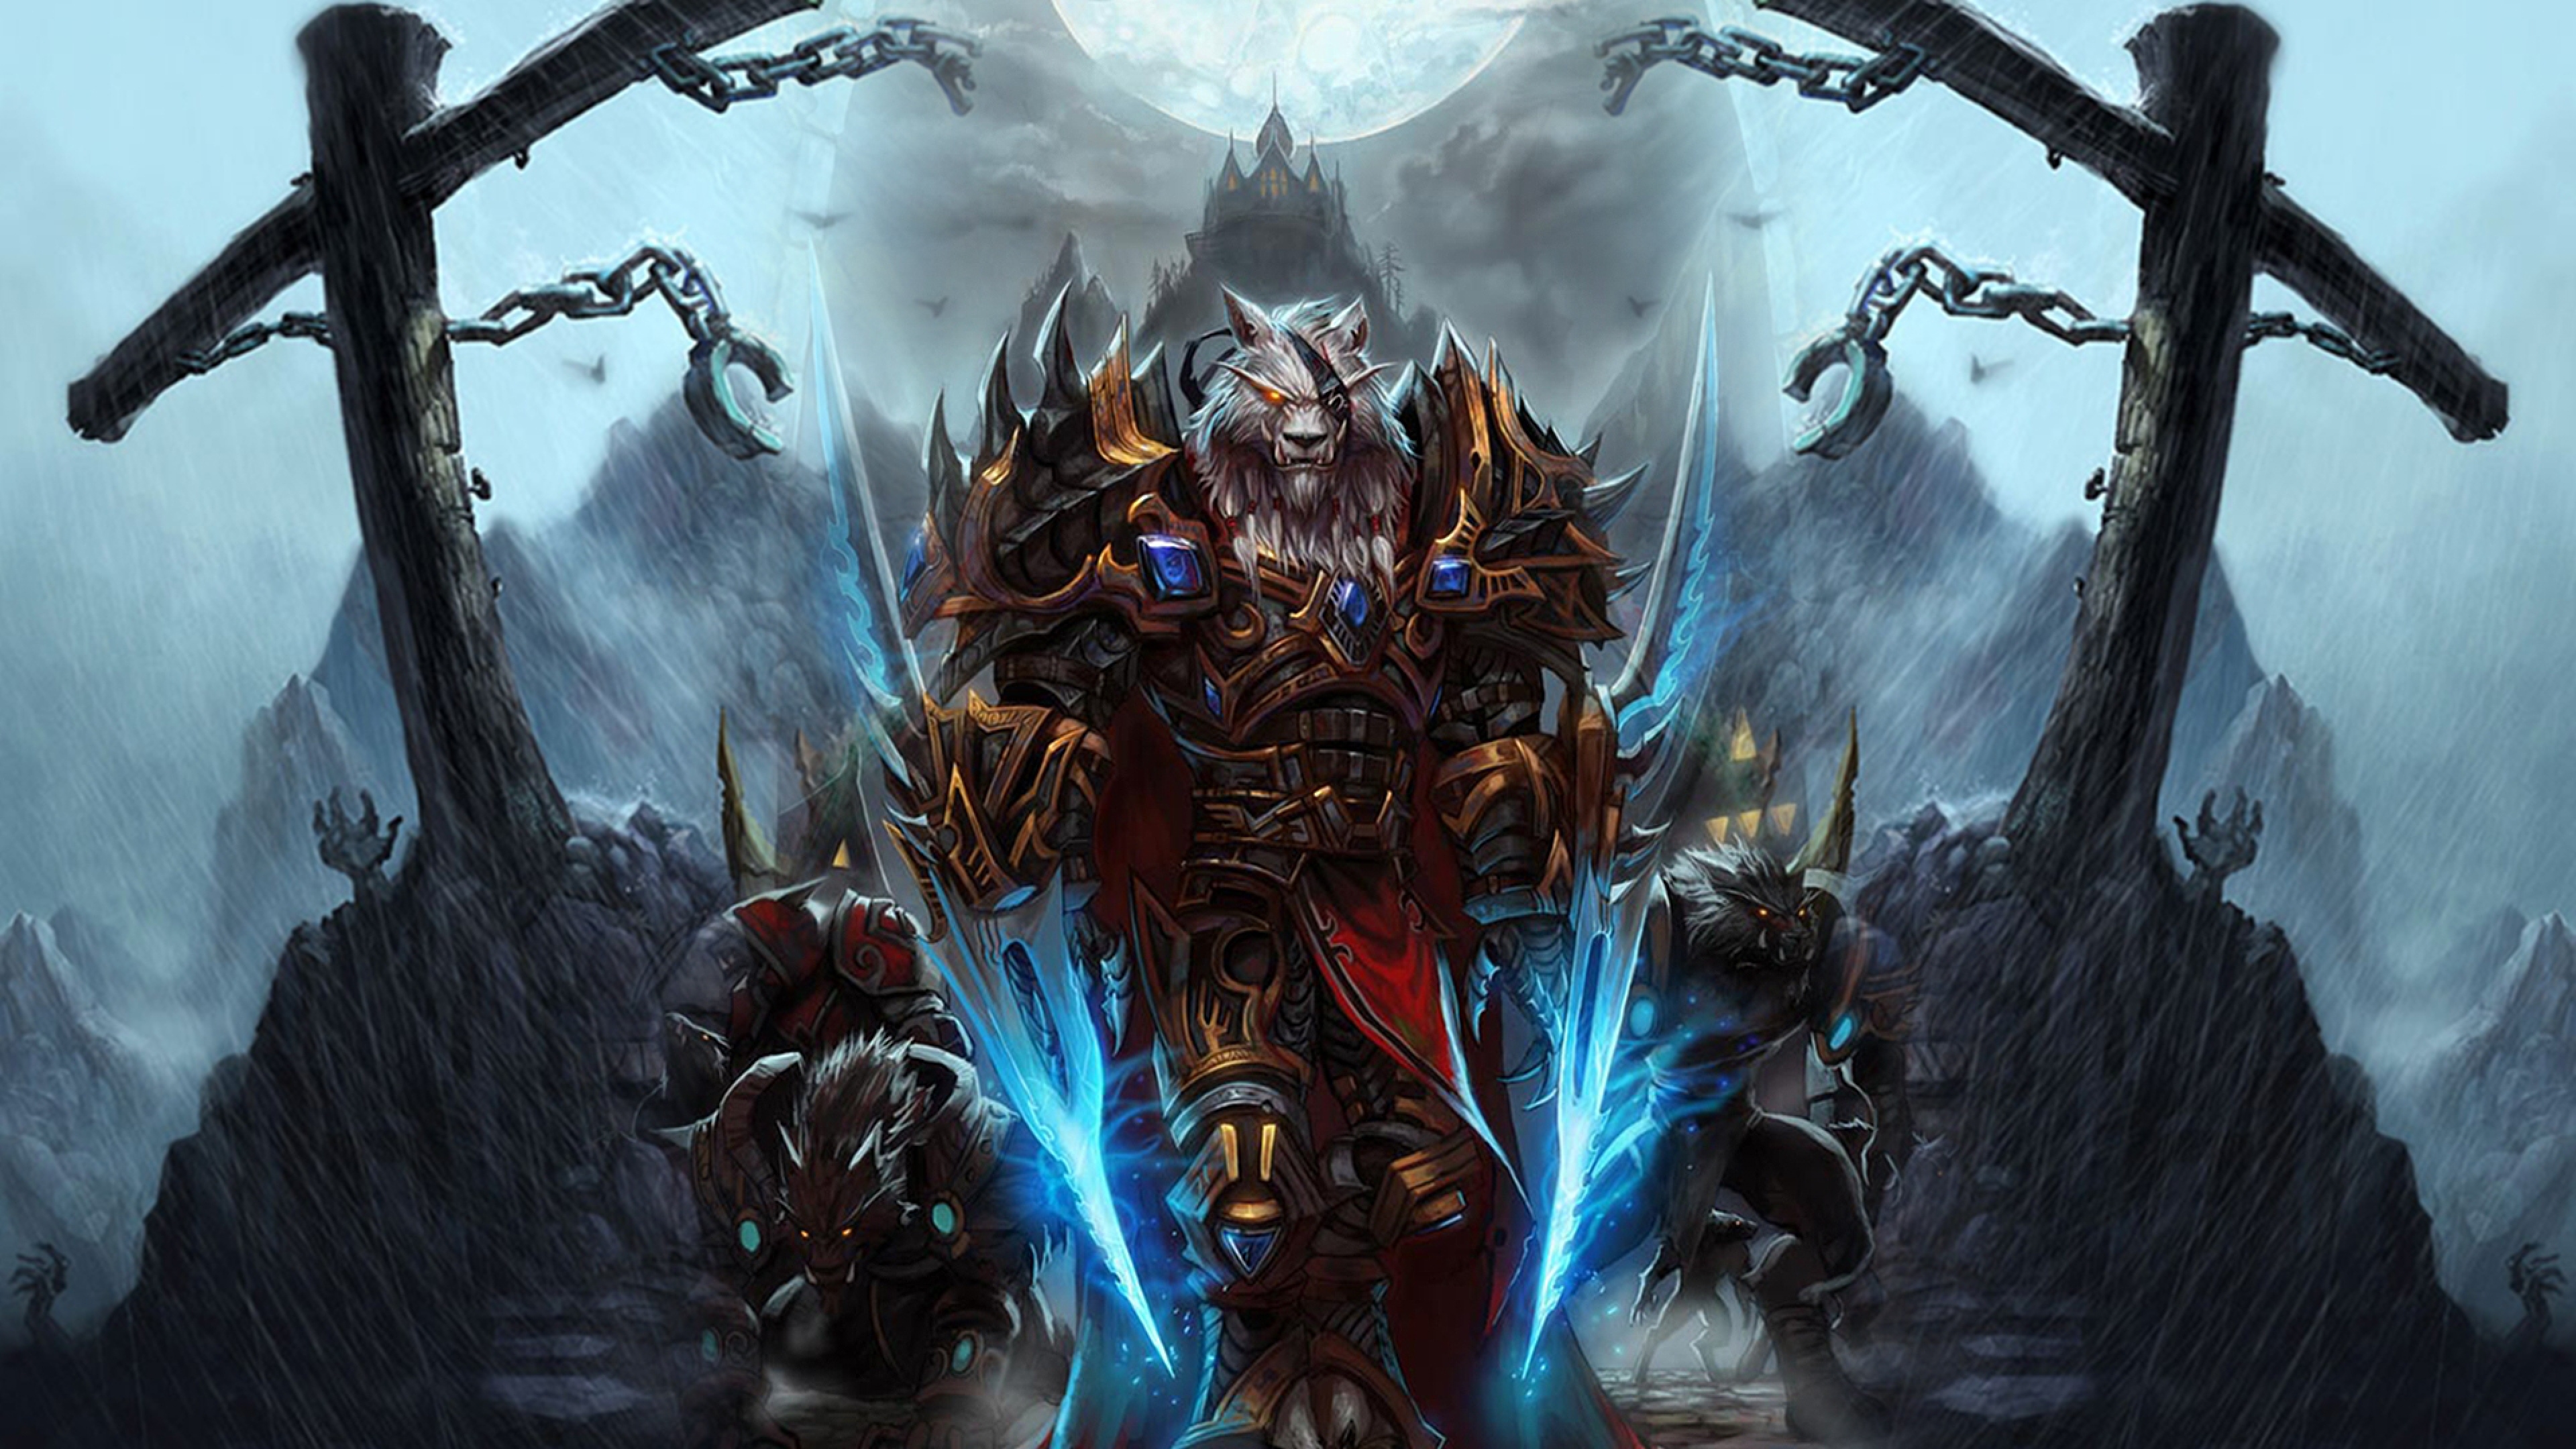 Download Wallpaper 3840x2160 world of warcraft worgen character arm 3840x2160